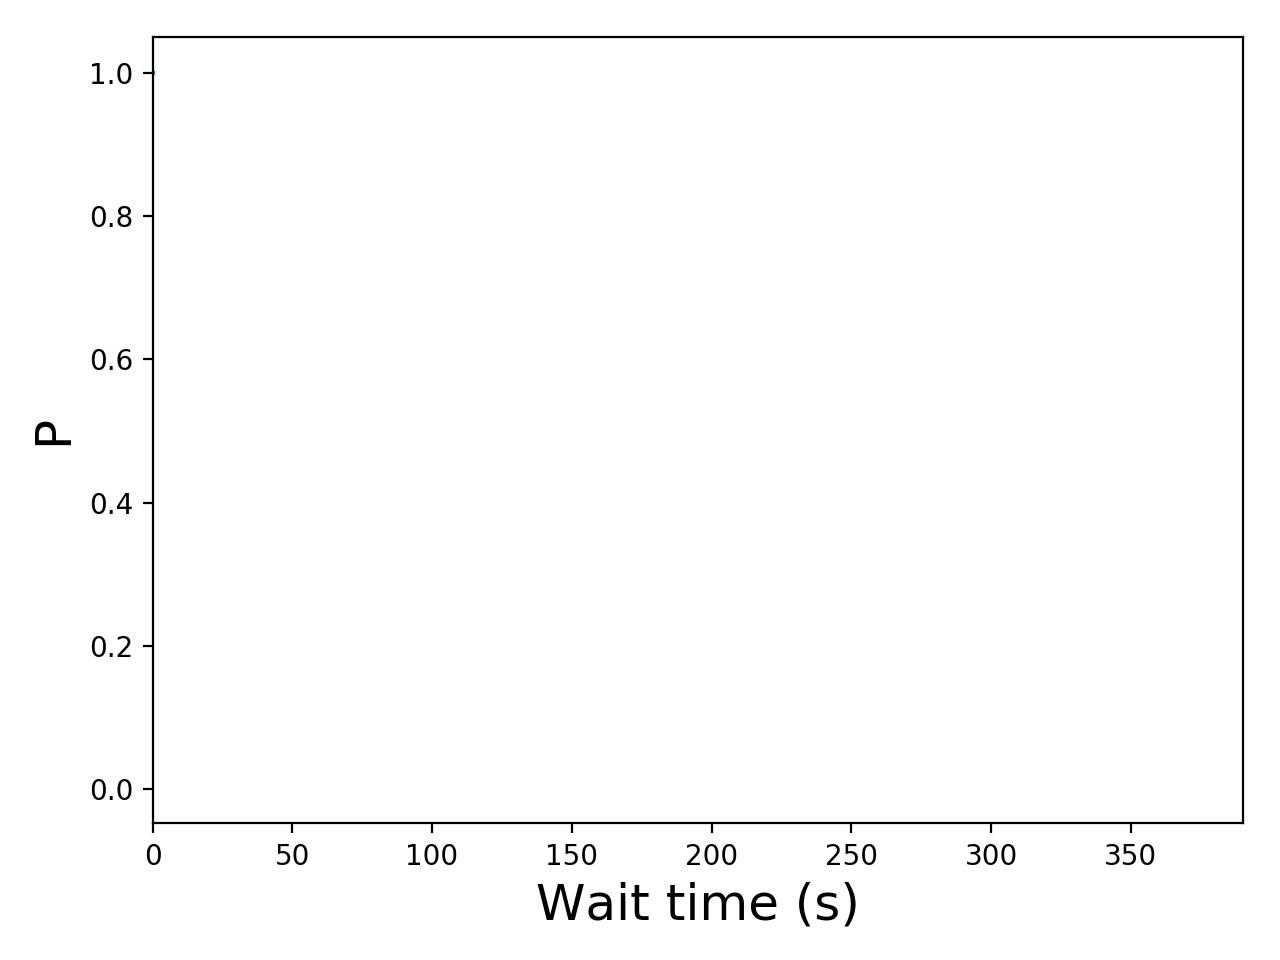 Task wait time CDF graph for the askalon-new_ee21 trace.